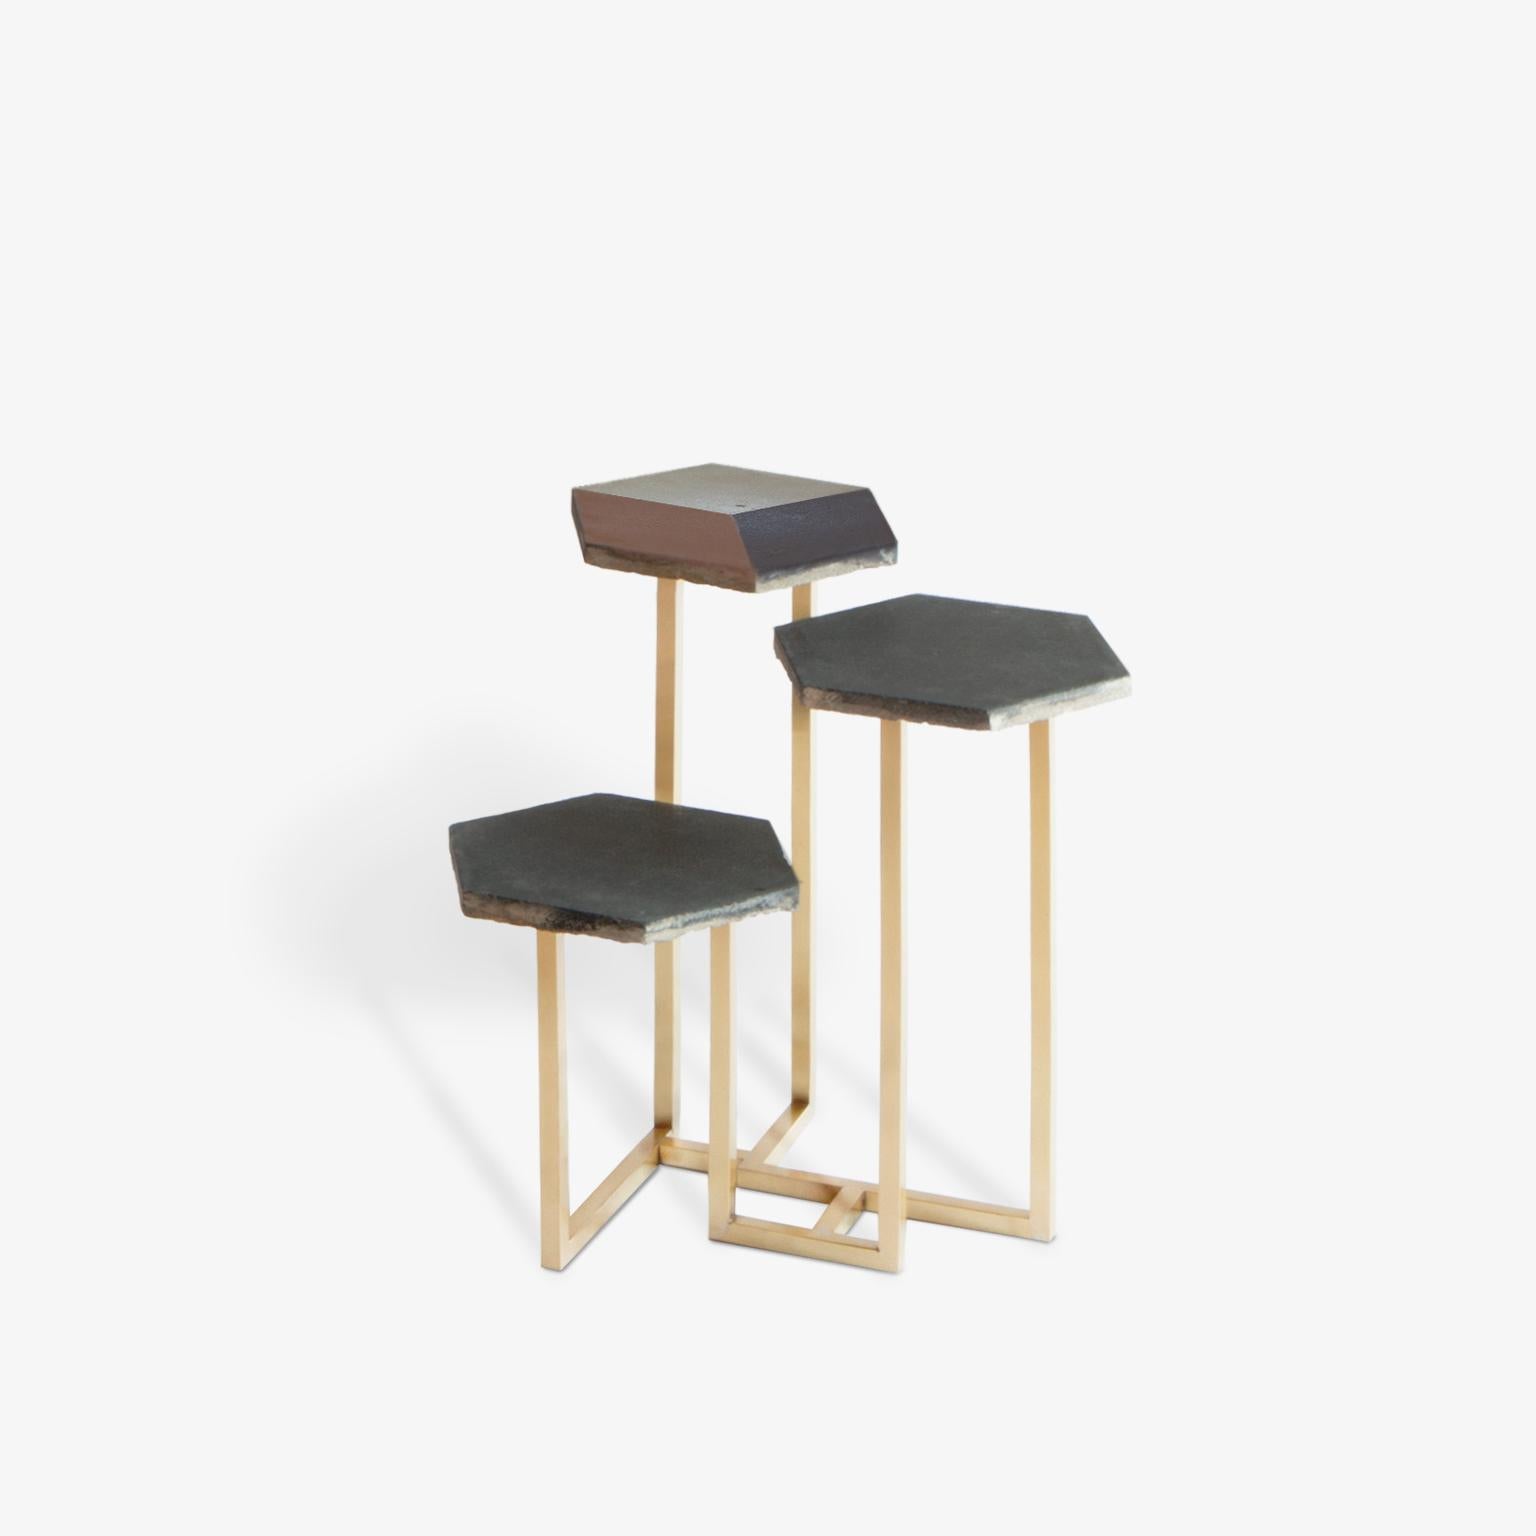 This modular tables are made with hexagonal flooring tiles from aristocratic Milanese residence and base in opaque brass. All the pieces are handmade by small-scale fabricators and show a dedication to both experimentation and the honesty and